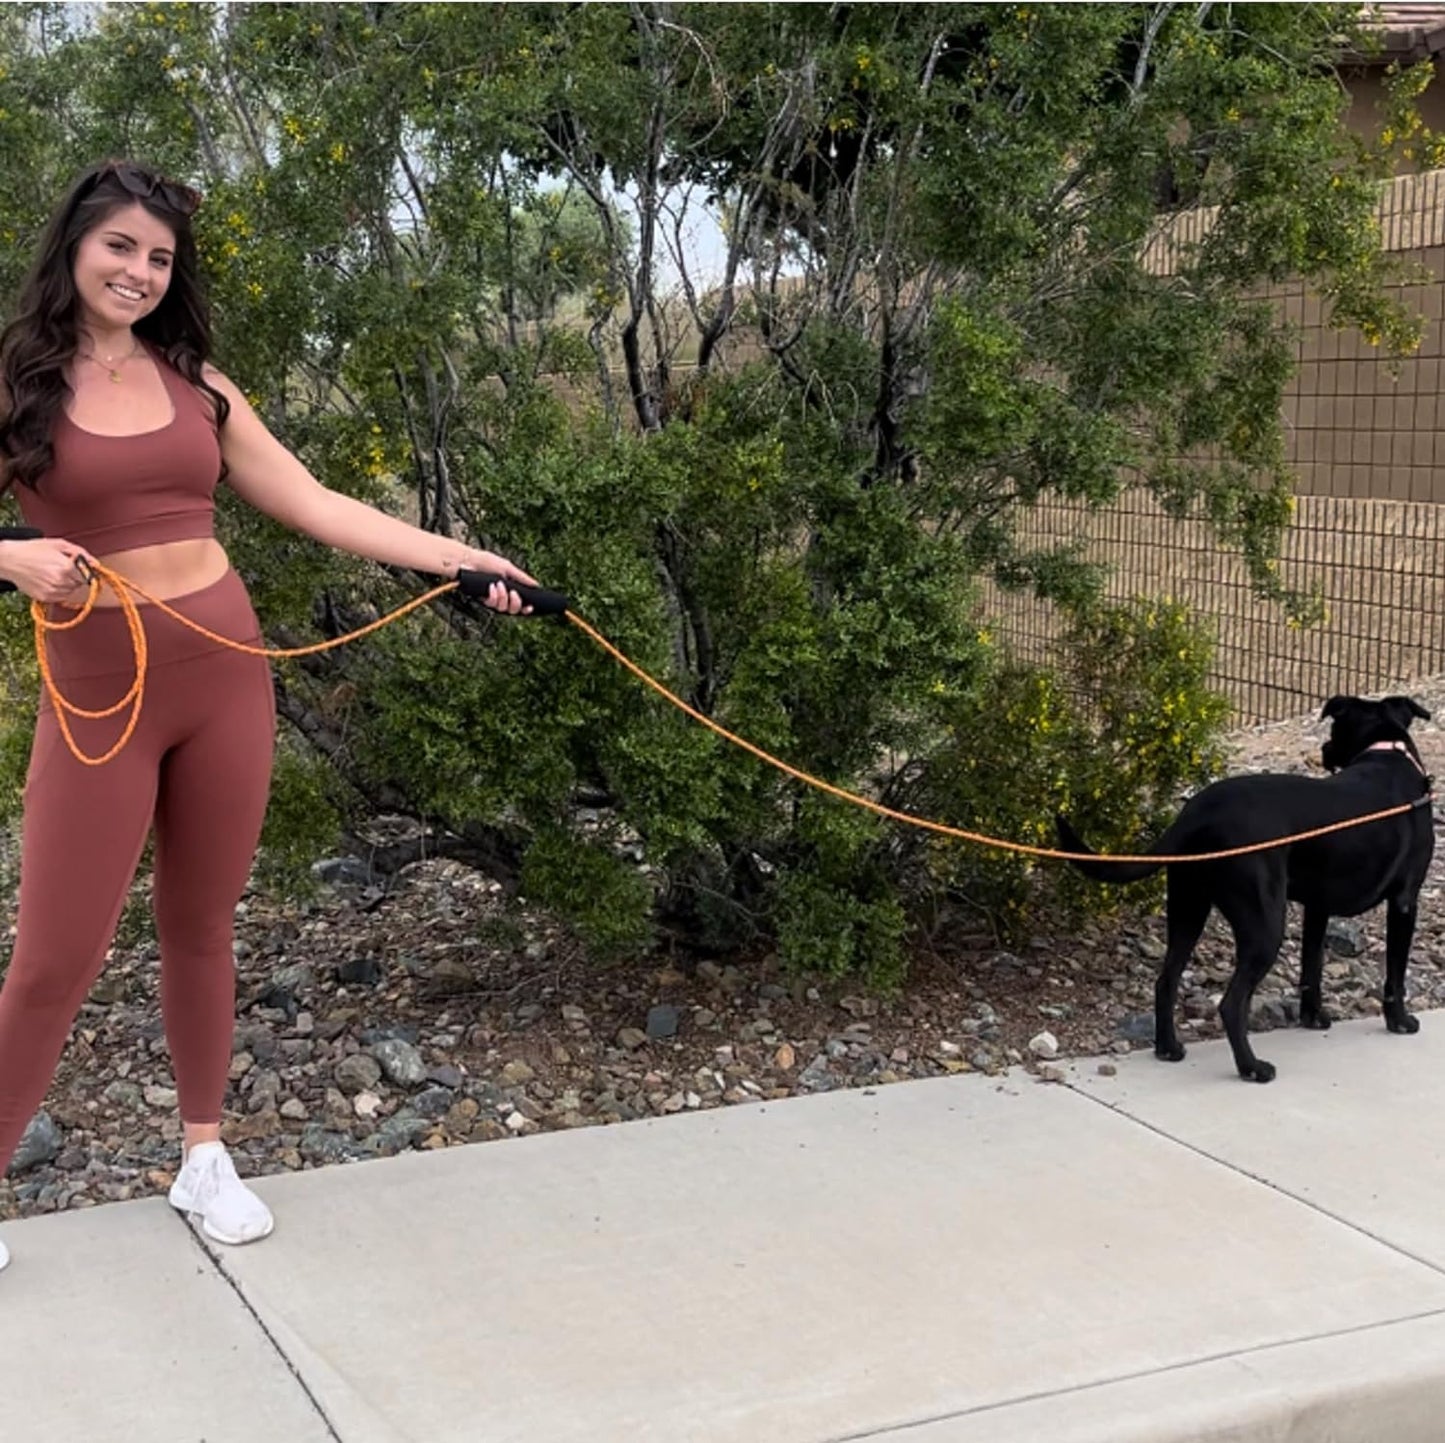 20m Rope Long Line Training Lead for Dogs/ Train Recall and Obedience Commands - Includes Control Handle & Storage Bag